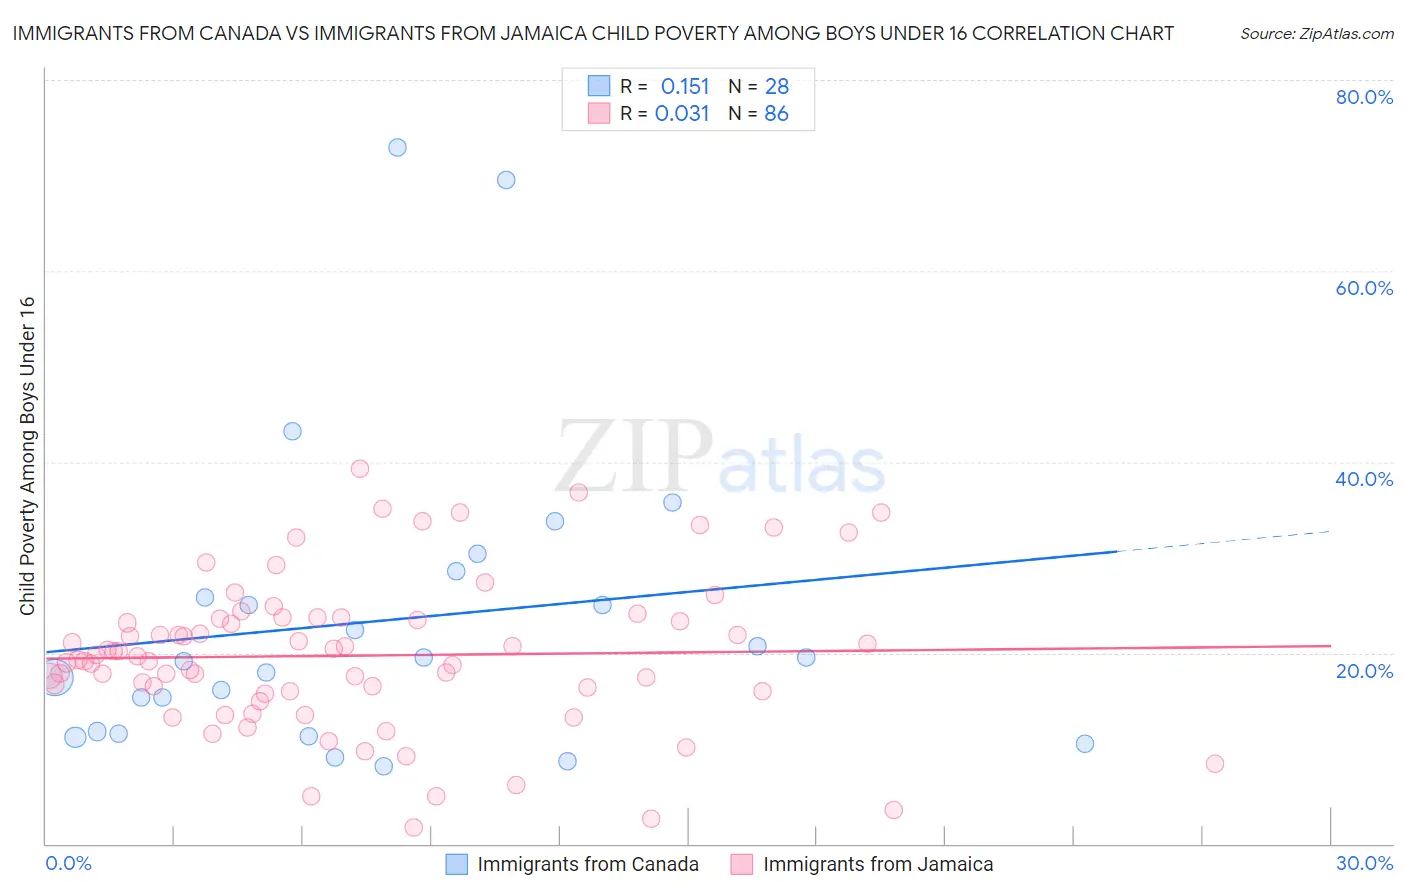 Immigrants from Canada vs Immigrants from Jamaica Child Poverty Among Boys Under 16